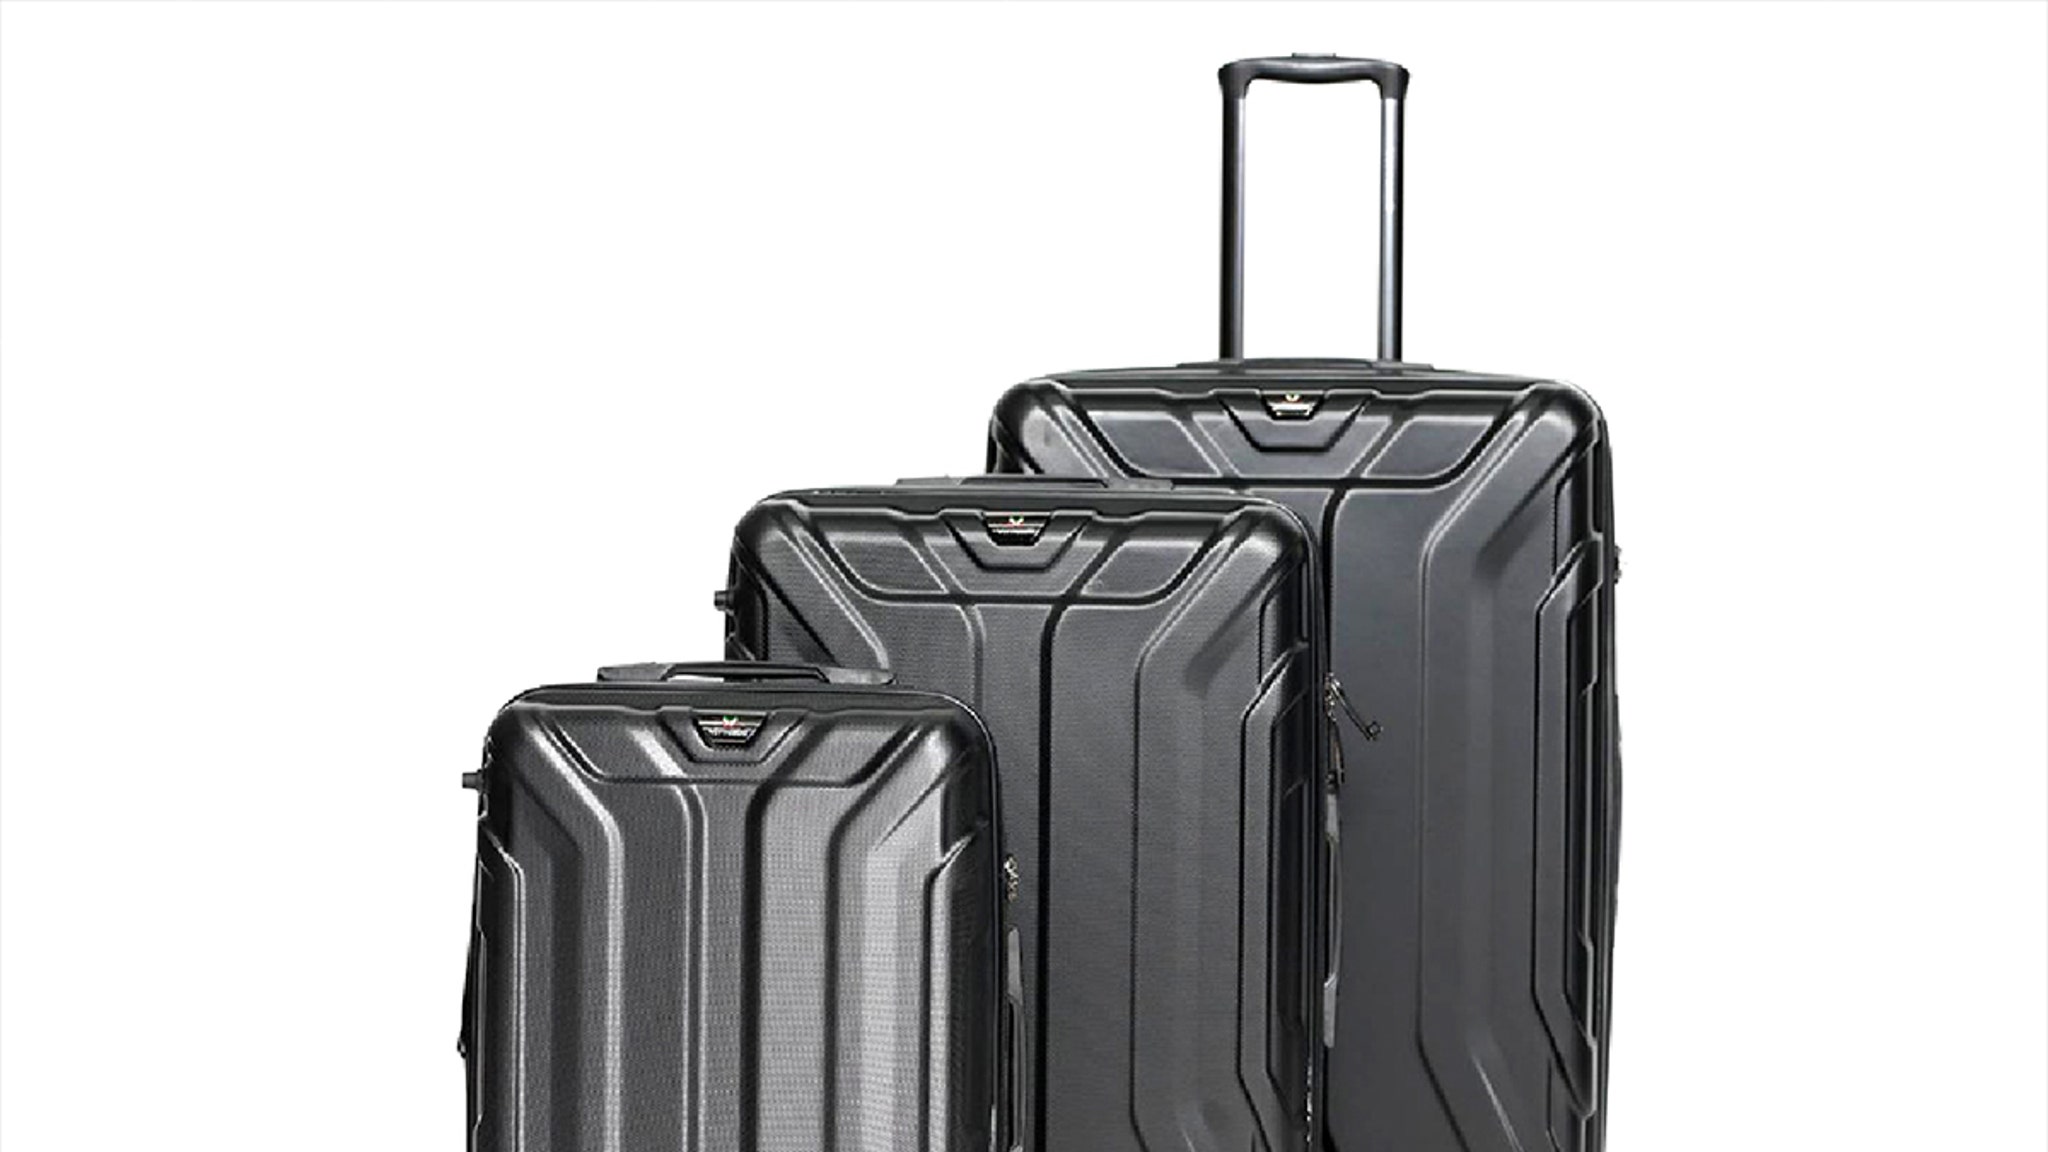 This Roomy 3-Piece Luggage Set Has Built-In Locks and Is 38% Off